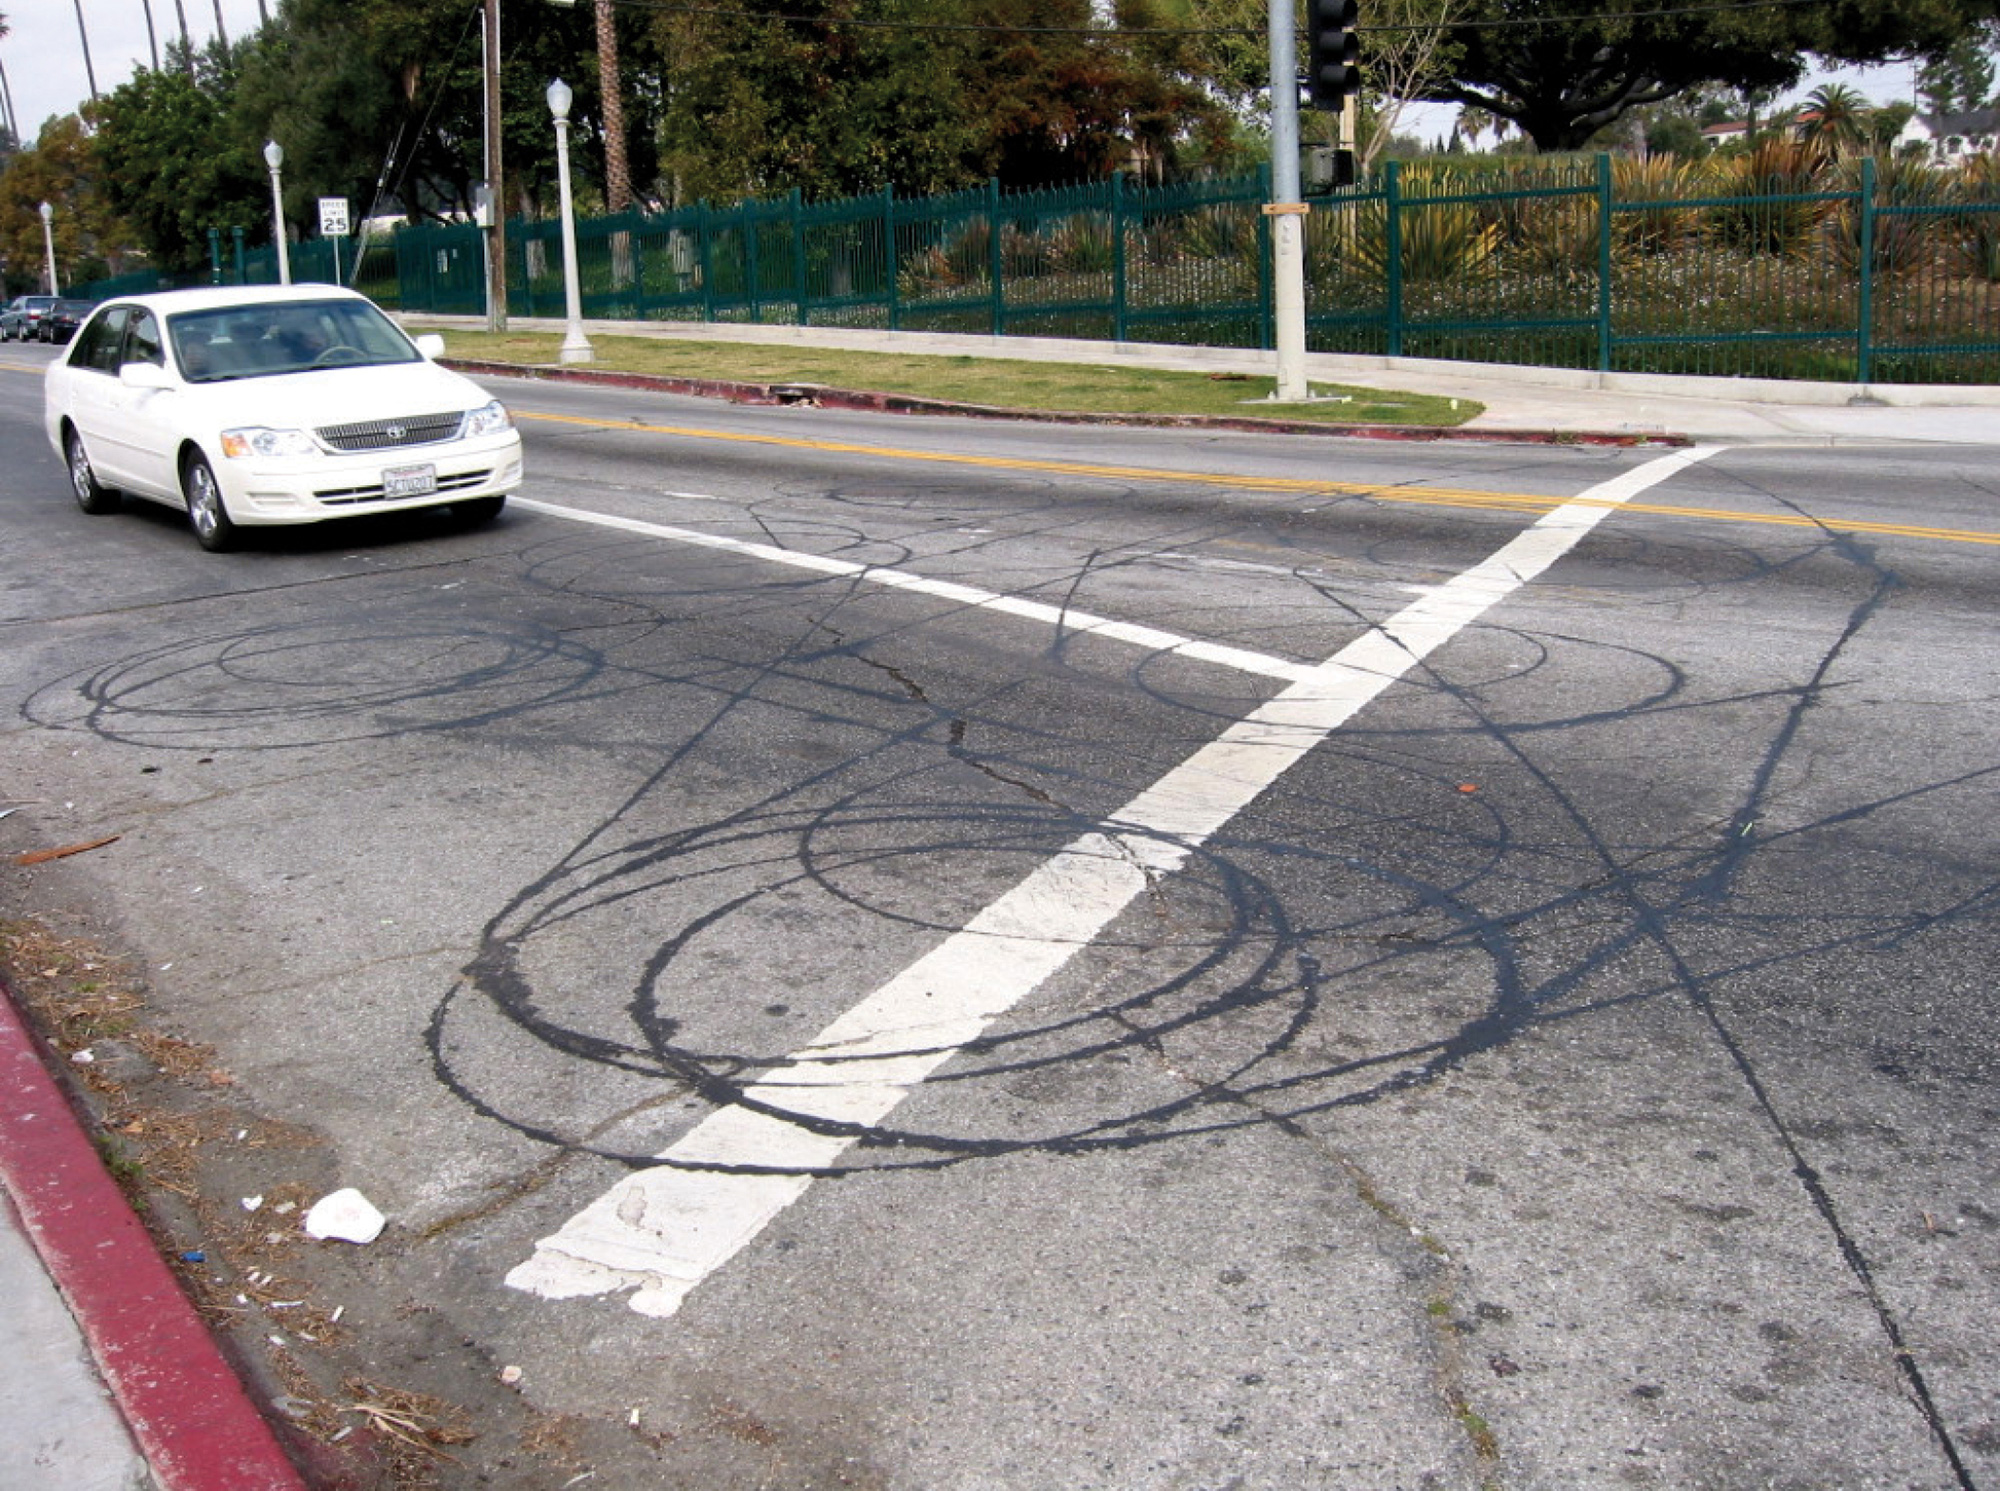 A photograph of a car and tire marks on a road.